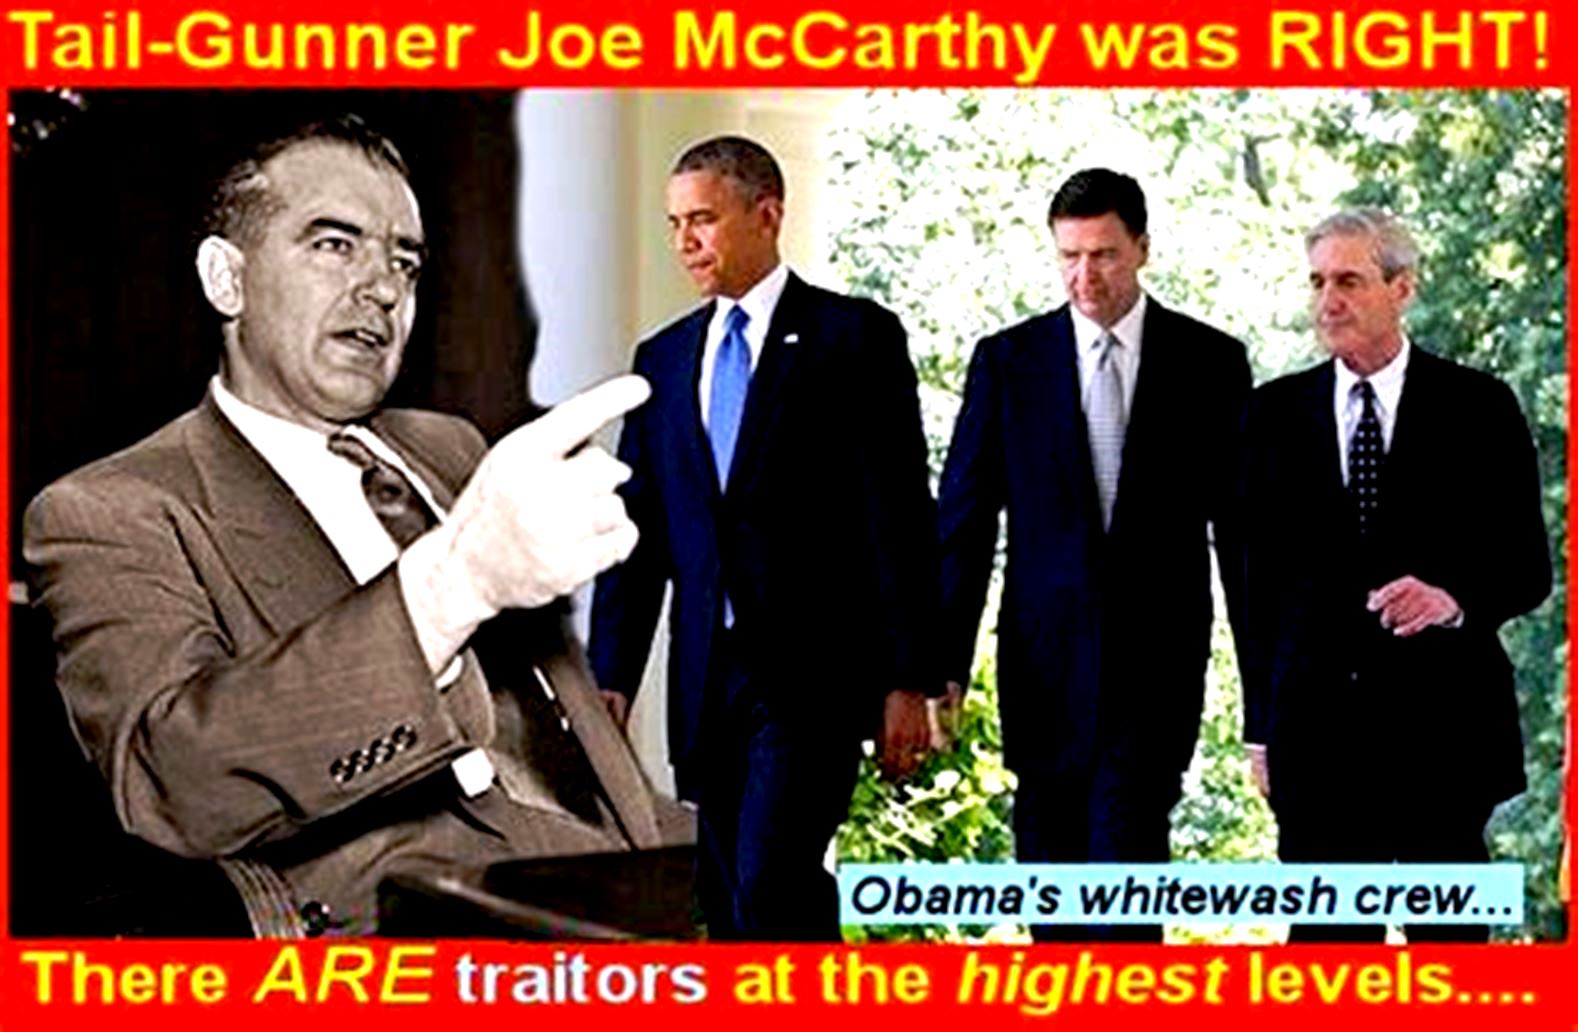 McCarthy was Right